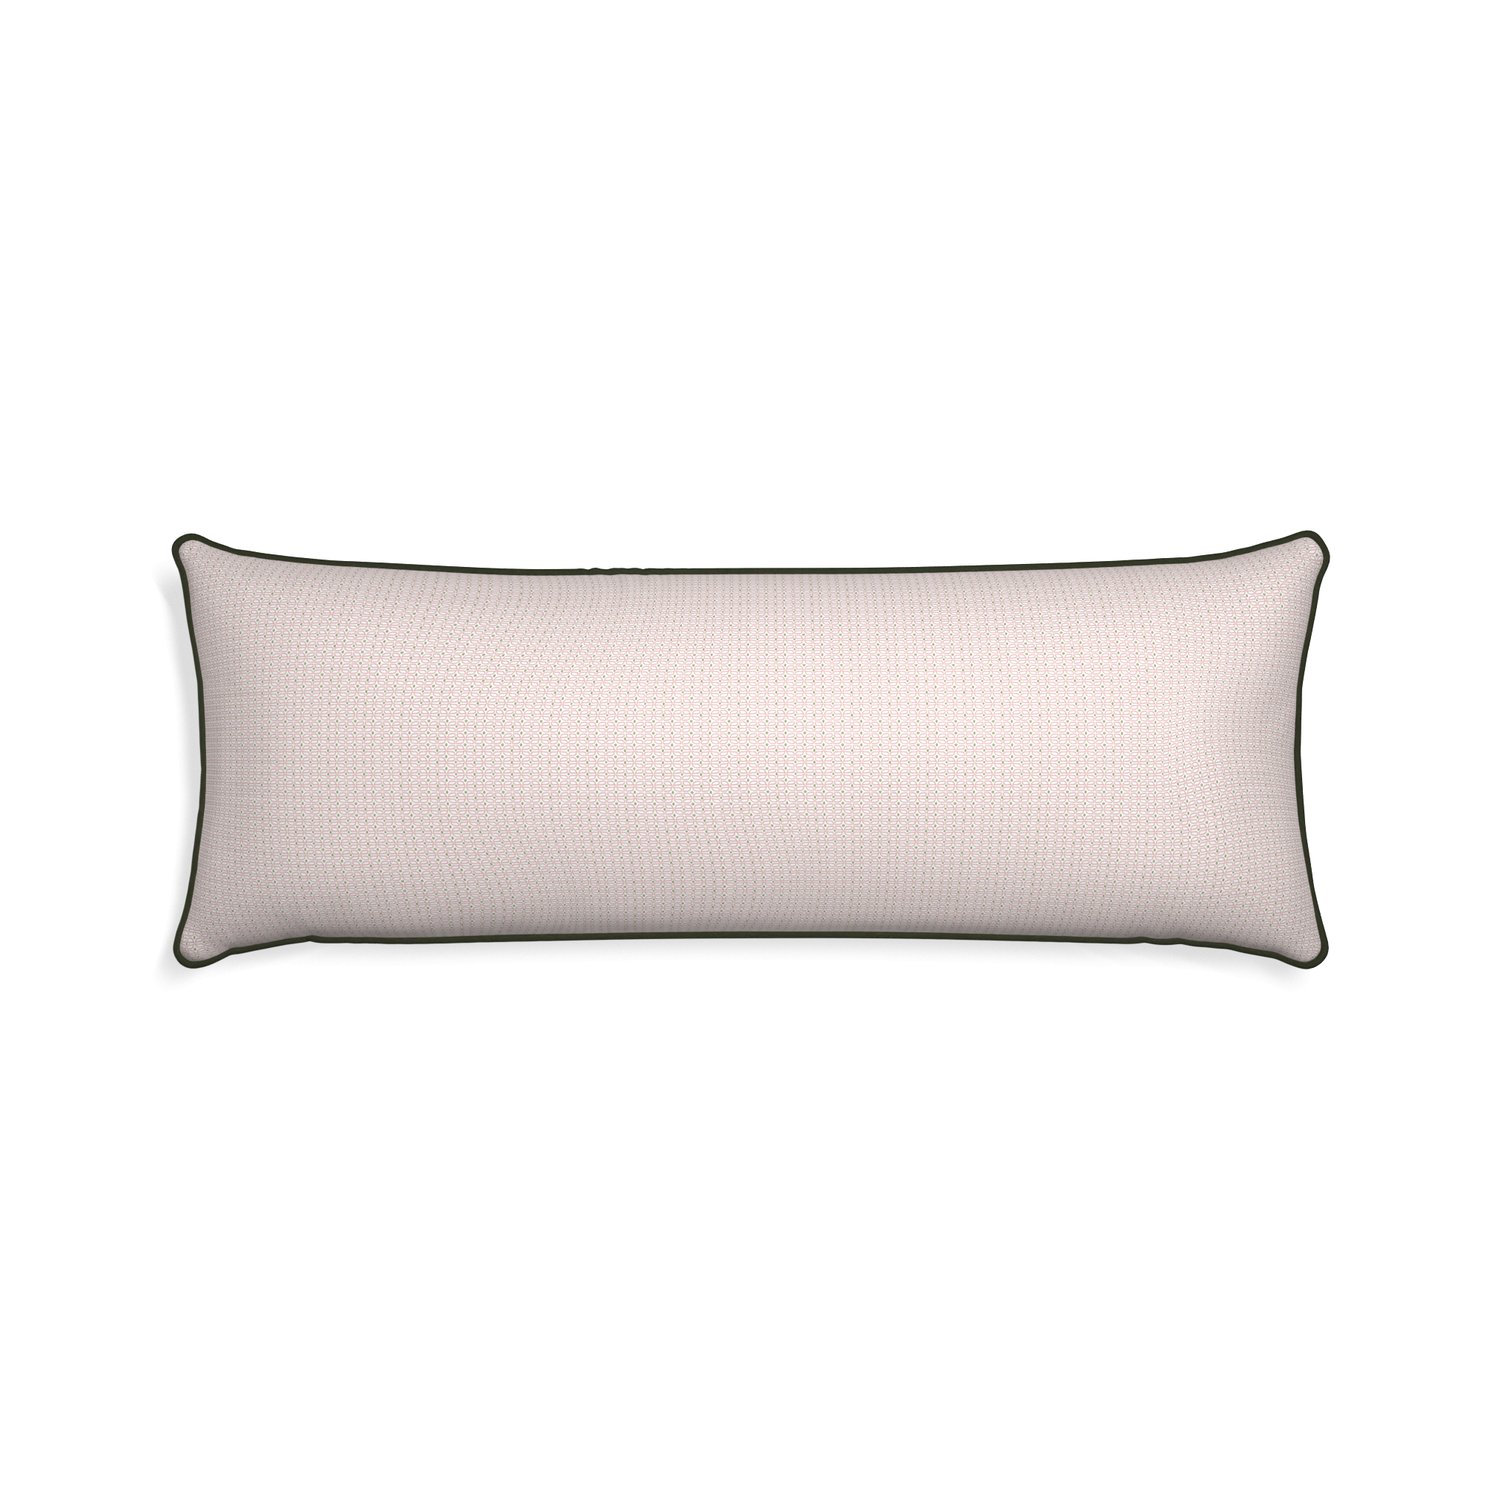 Xl-lumbar loomi pink custom pink geometricpillow with f piping on white background